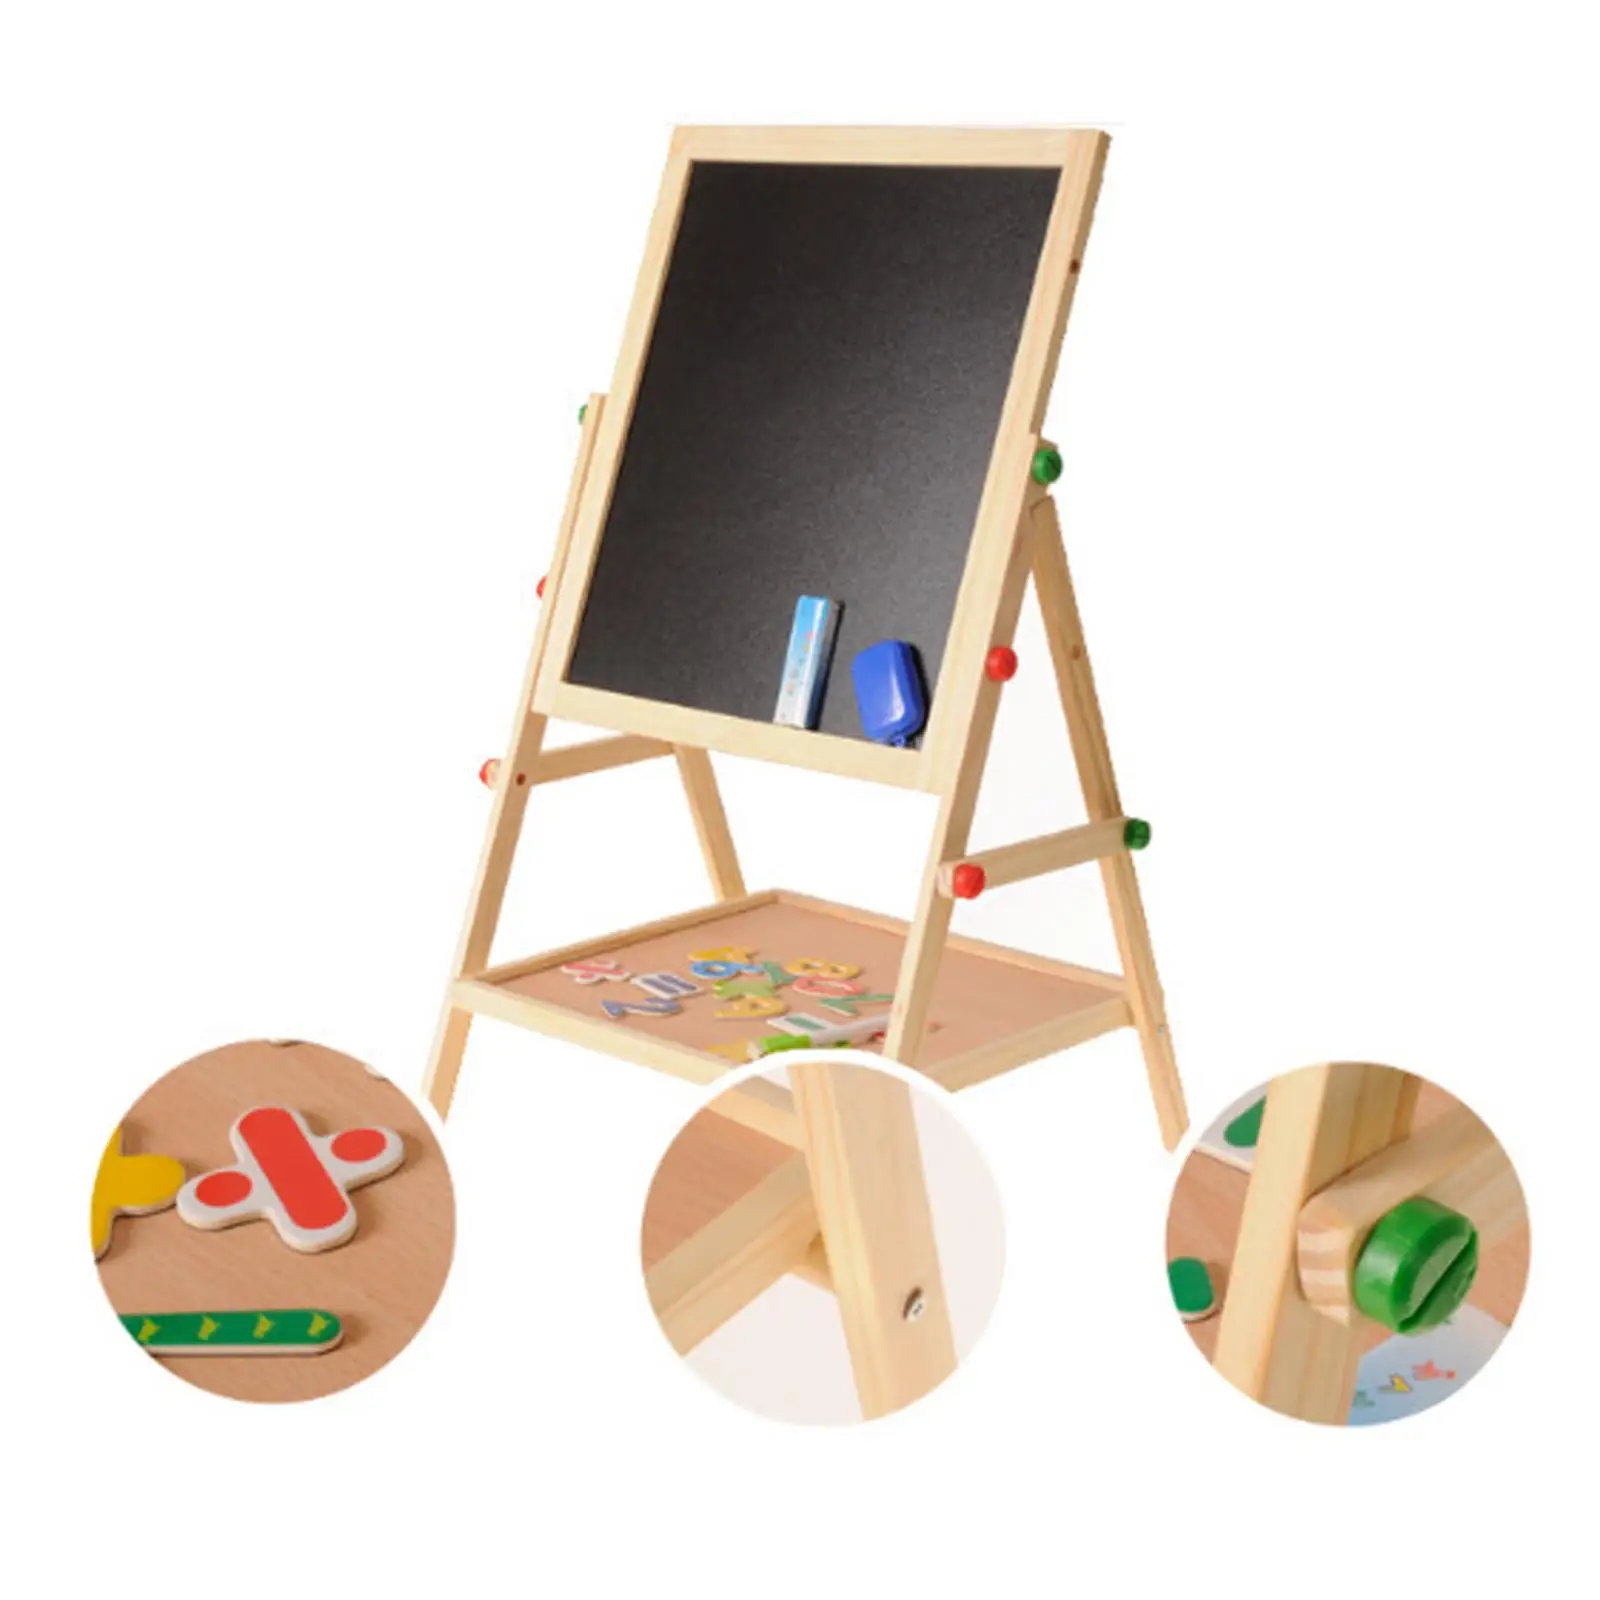 Kids Easel height Chalkboard Standing Drawing Easel Board erase Board Double Sided Drawing Easel for indoor